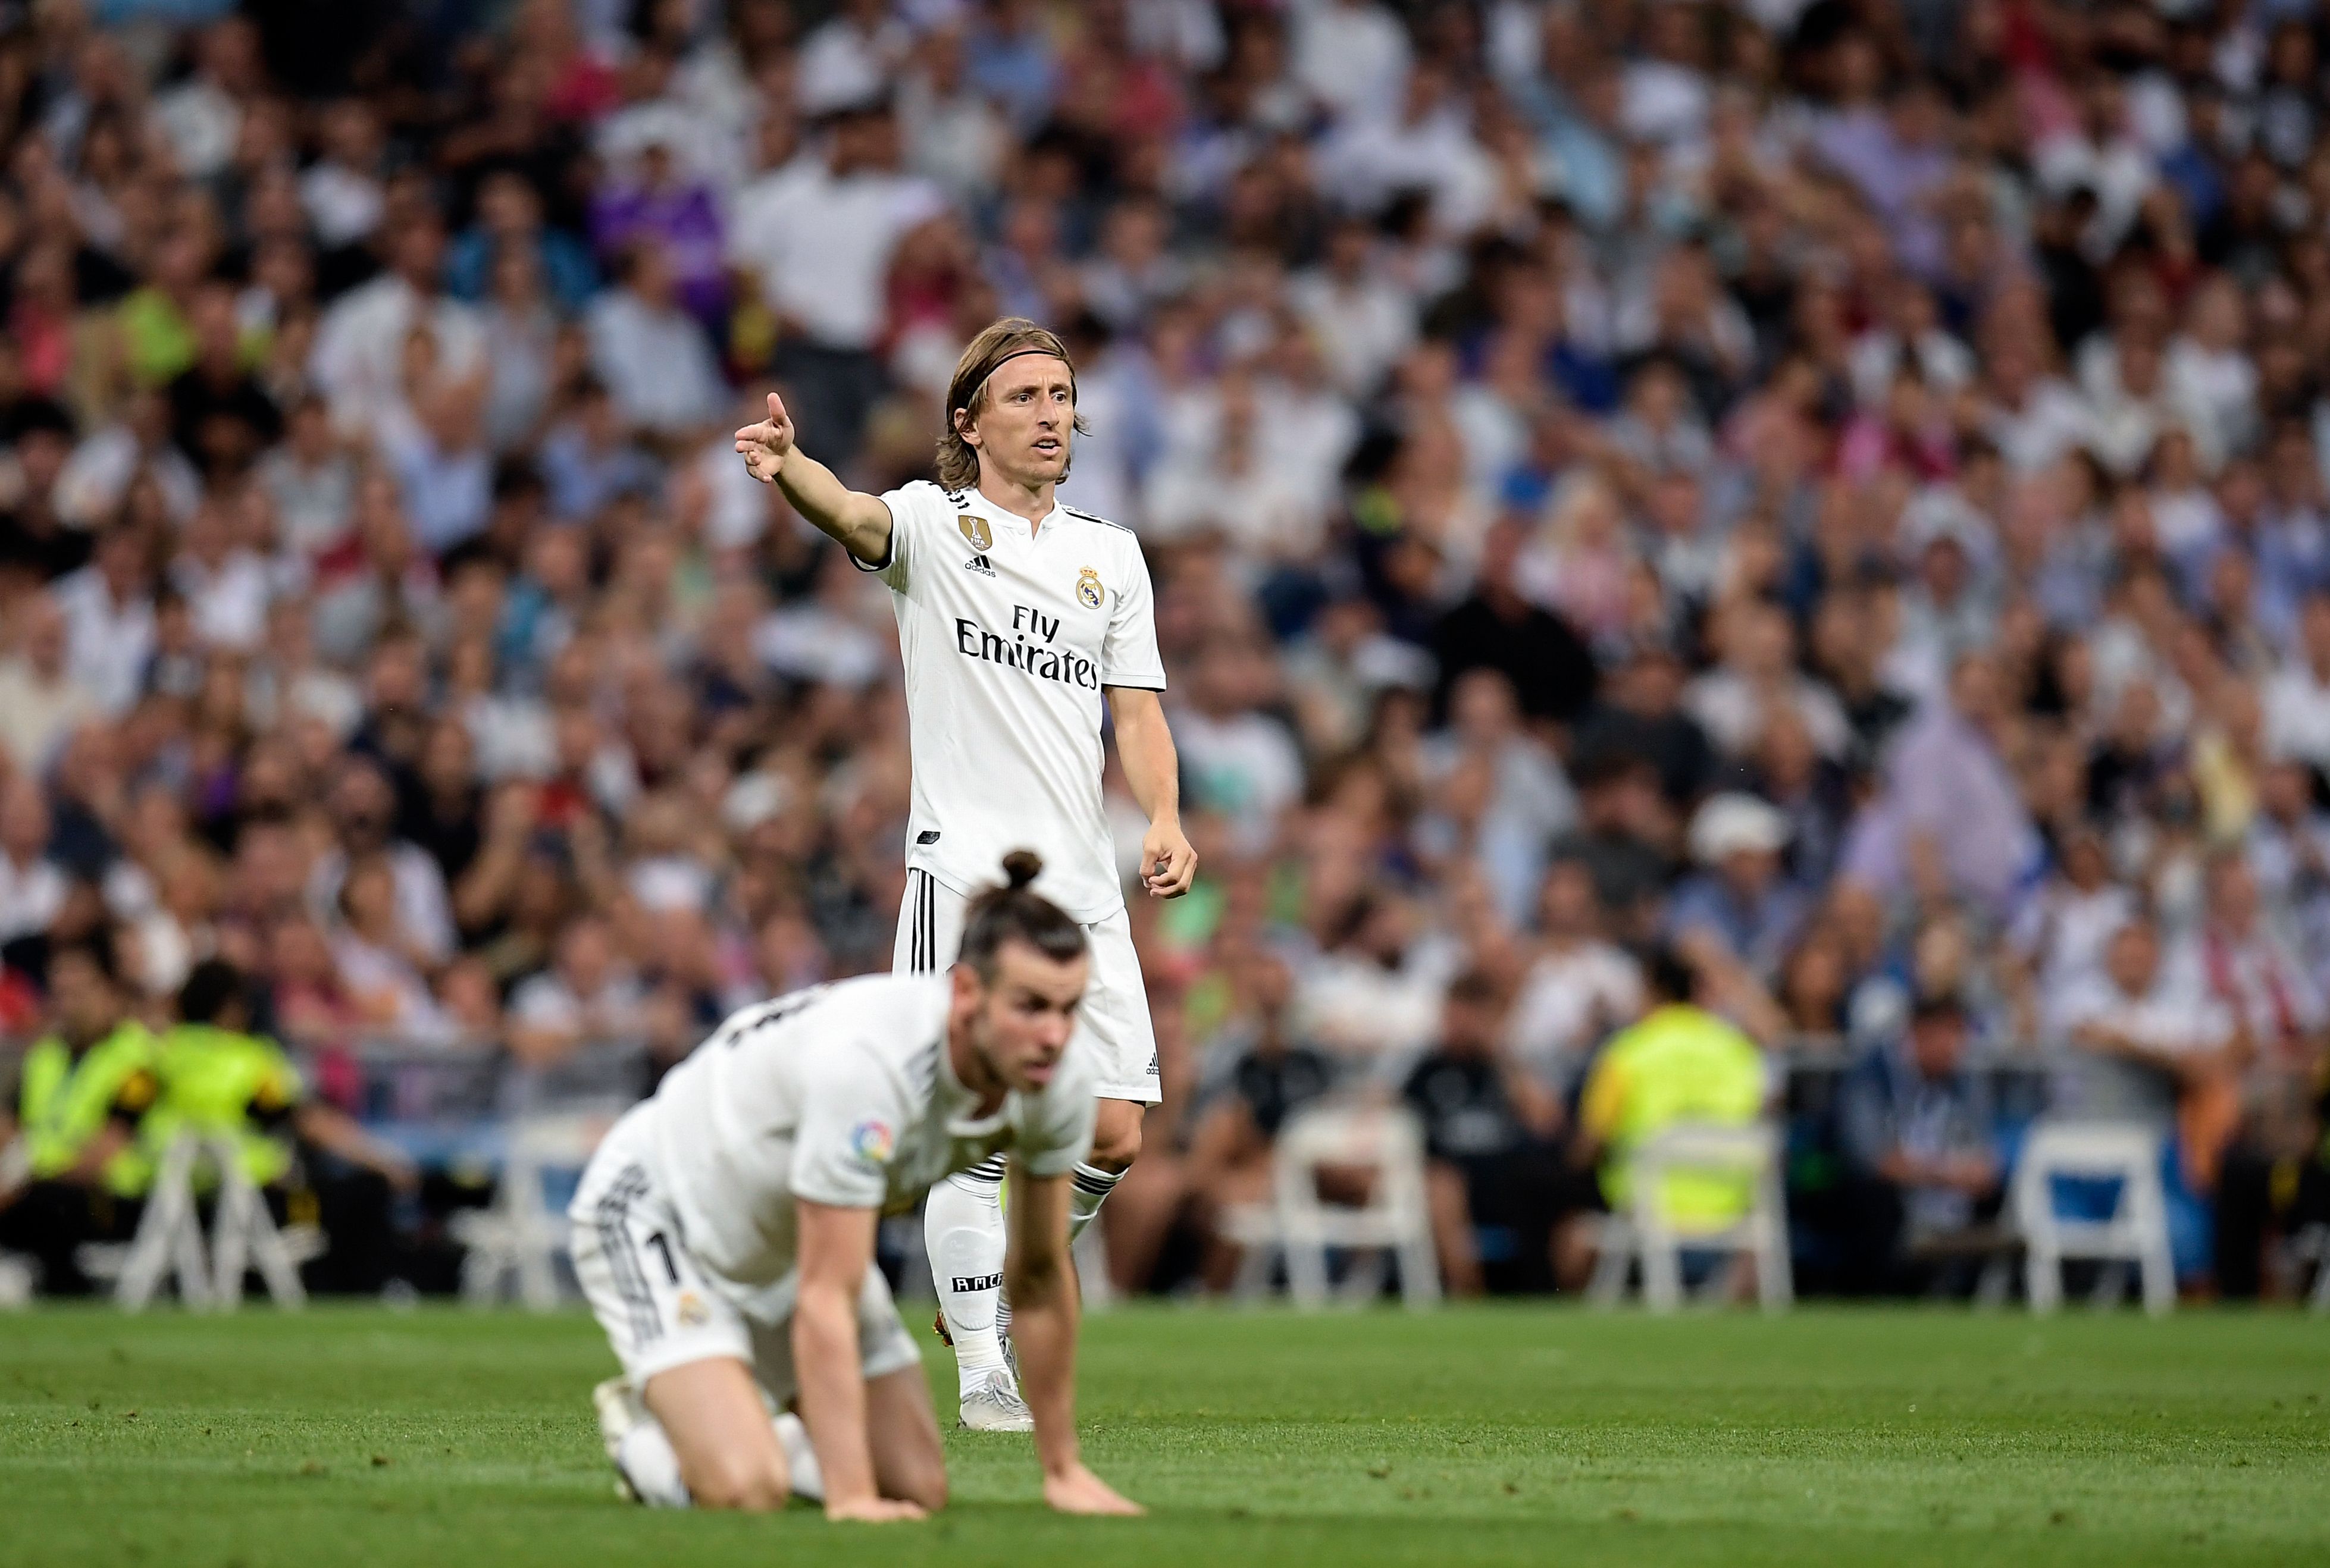 Real Madrid's Croatian midfielder Luka Modric (R) gestures next to Real Madrid's Welsh forward Gareth Bale during the Spanish league football match between Real Madrid CF and Club Atletico de Madrid at the Santiago Bernabeu stadium in Madrid on September 29, 2018. (Photo by OSCAR DEL POZO / AFP)        (Photo credit should read OSCAR DEL POZO/AFP/Getty Images)